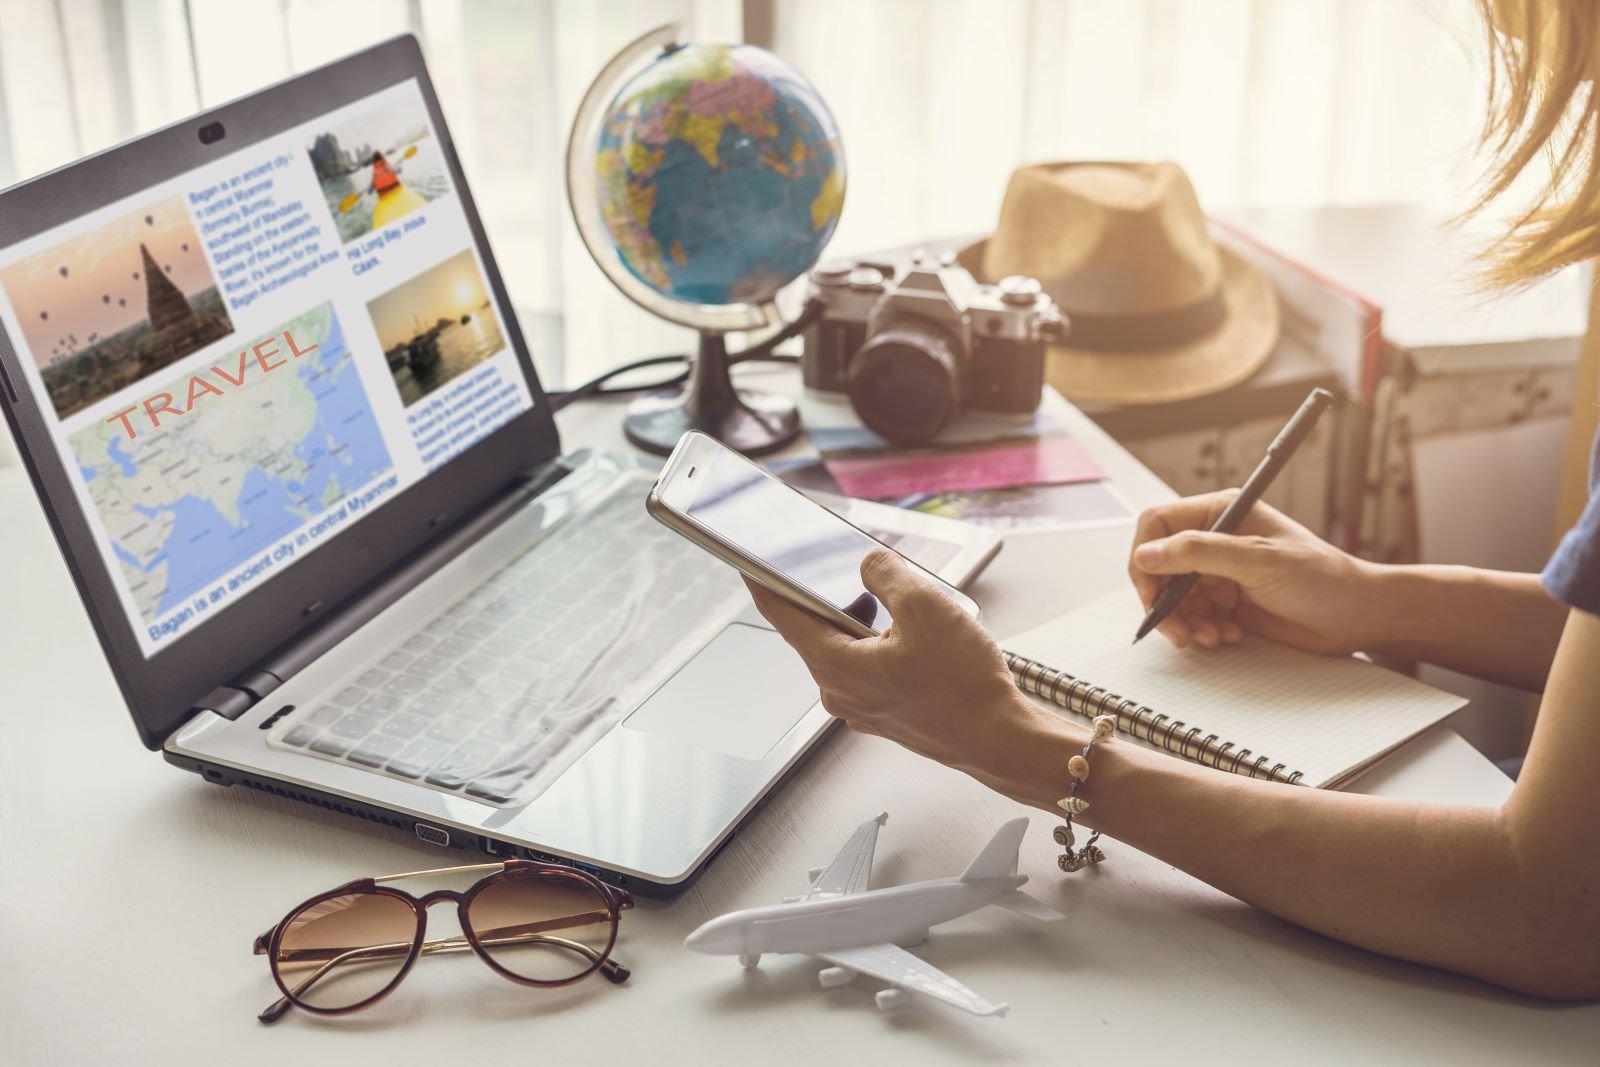 <p>Create a spreadsheet for all your bookings, expenses, and other details of your trip. This will help you plan better and stick to your budget.</p>